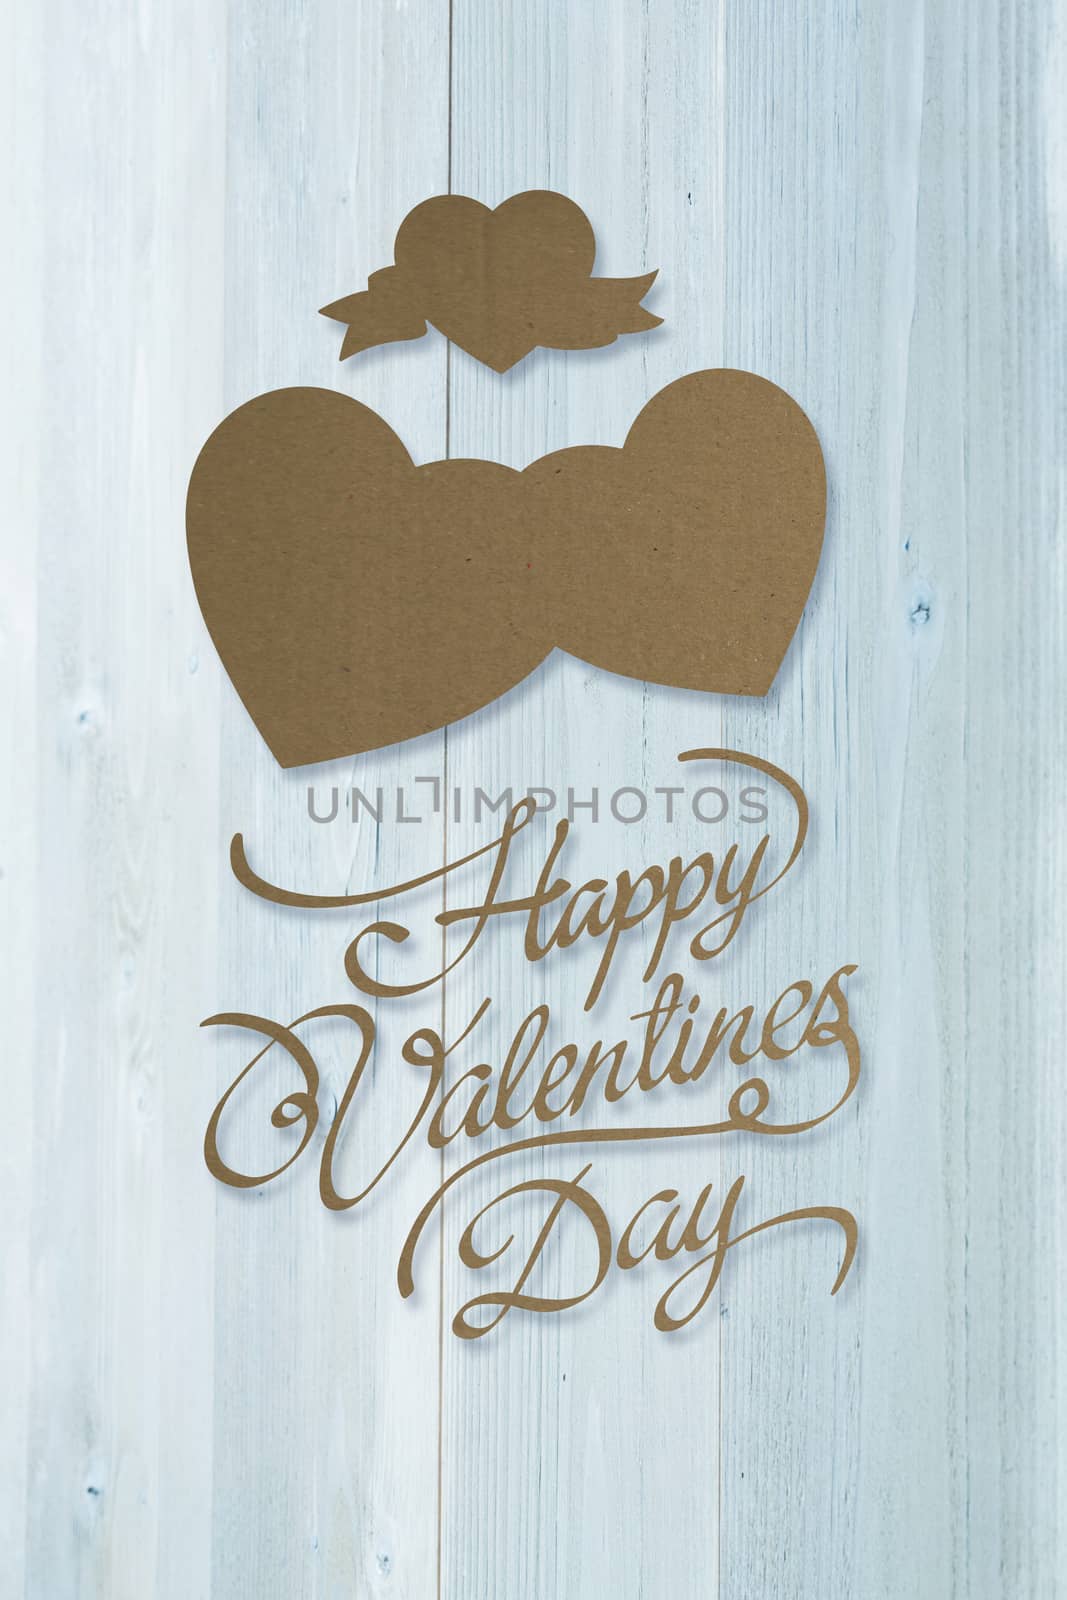 Composite image of valentines day greeting by Wavebreakmedia